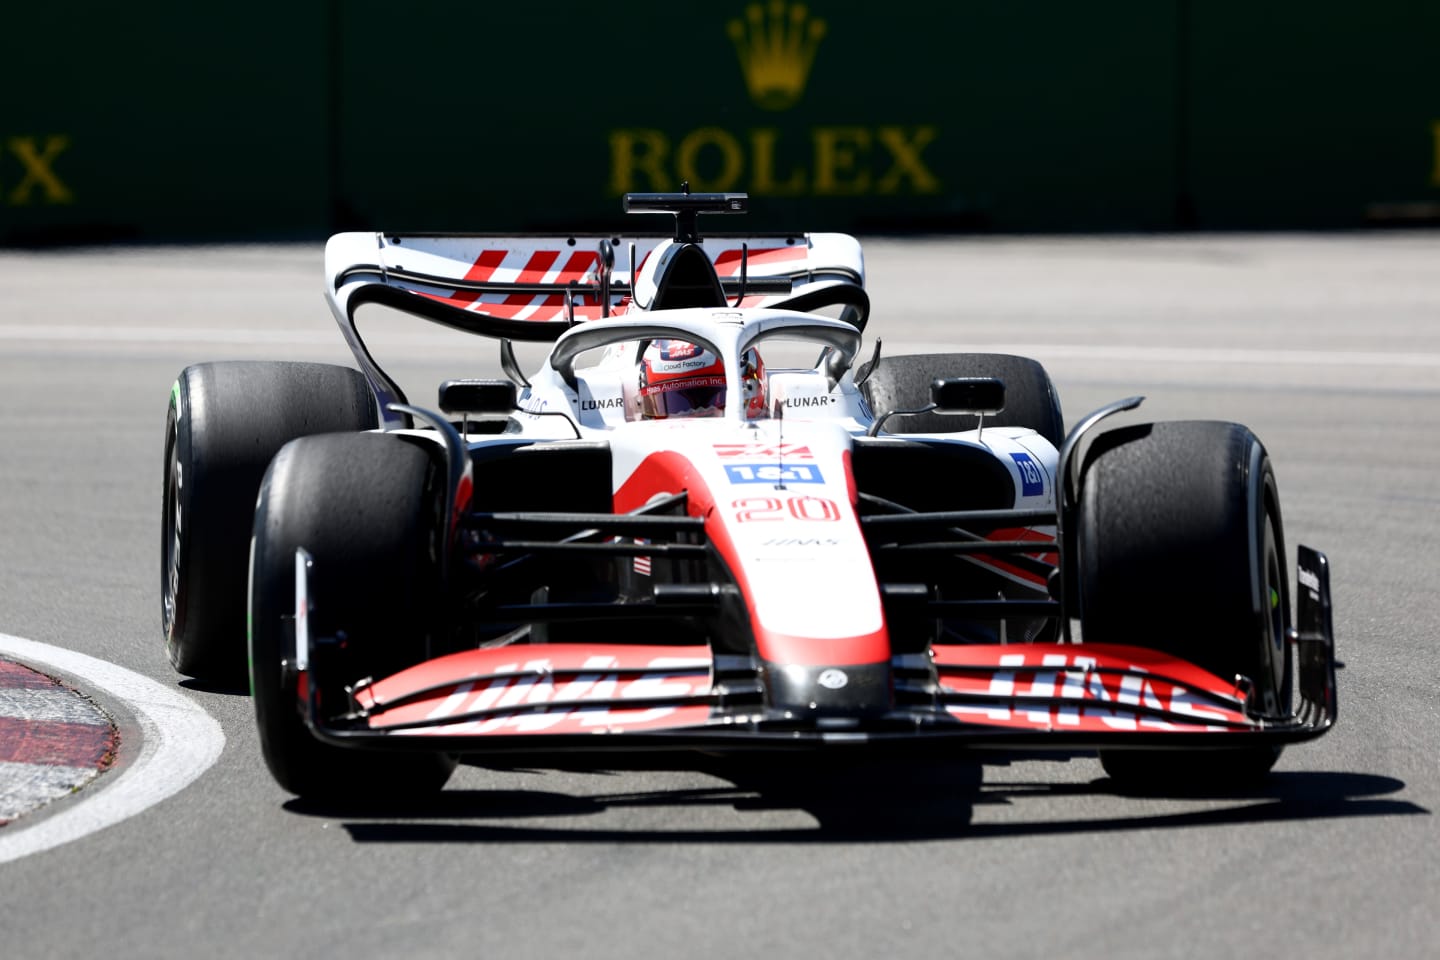 MONTREAL, QUEBEC - JUNE 19: Kevin Magnussen of Denmark driving the (20) Haas F1 VF-22 Ferrari on track during the F1 Grand Prix of Canada at Circuit Gilles Villeneuve on June 19, 2022 in Montreal, Quebec. (Photo by Clive Rose/Getty Images)